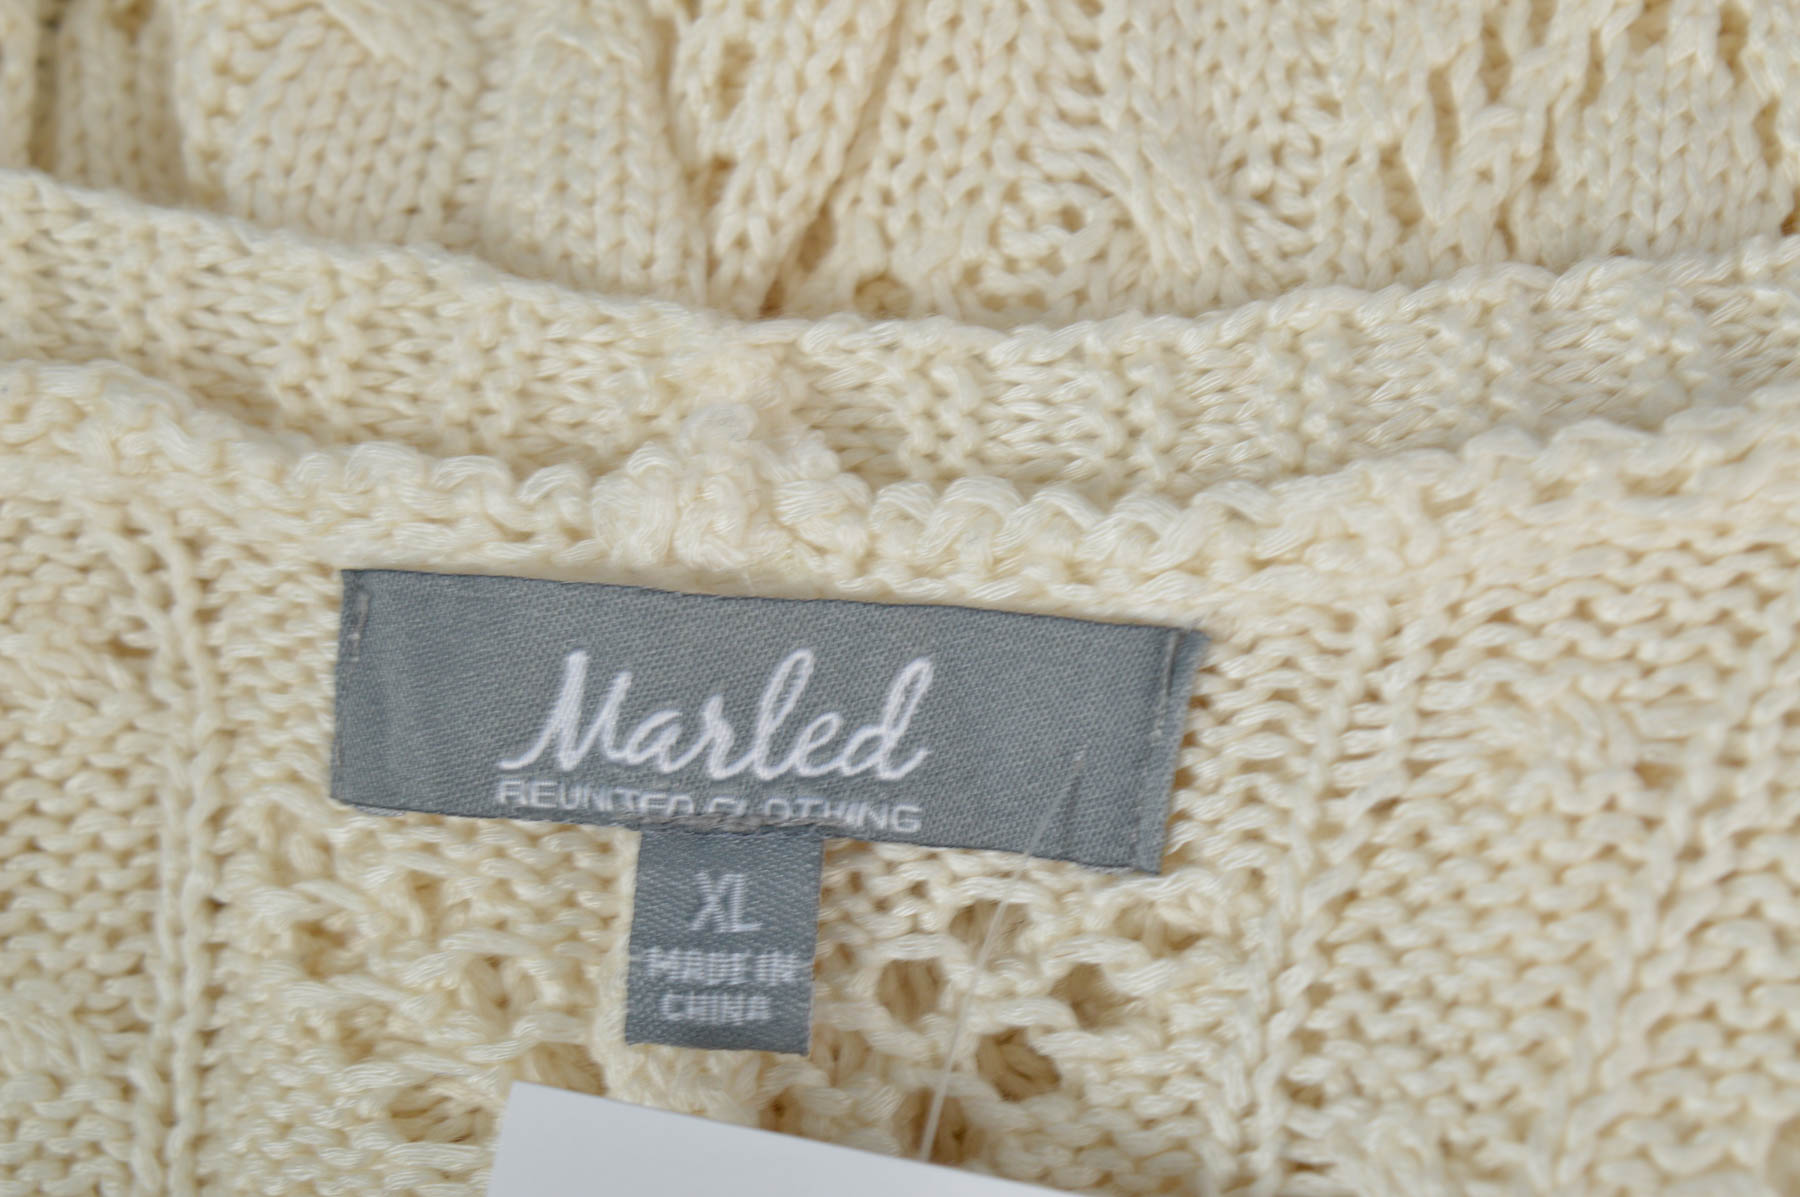 Women's cardigan - Marled BY REUNITED CLOTHING - 2